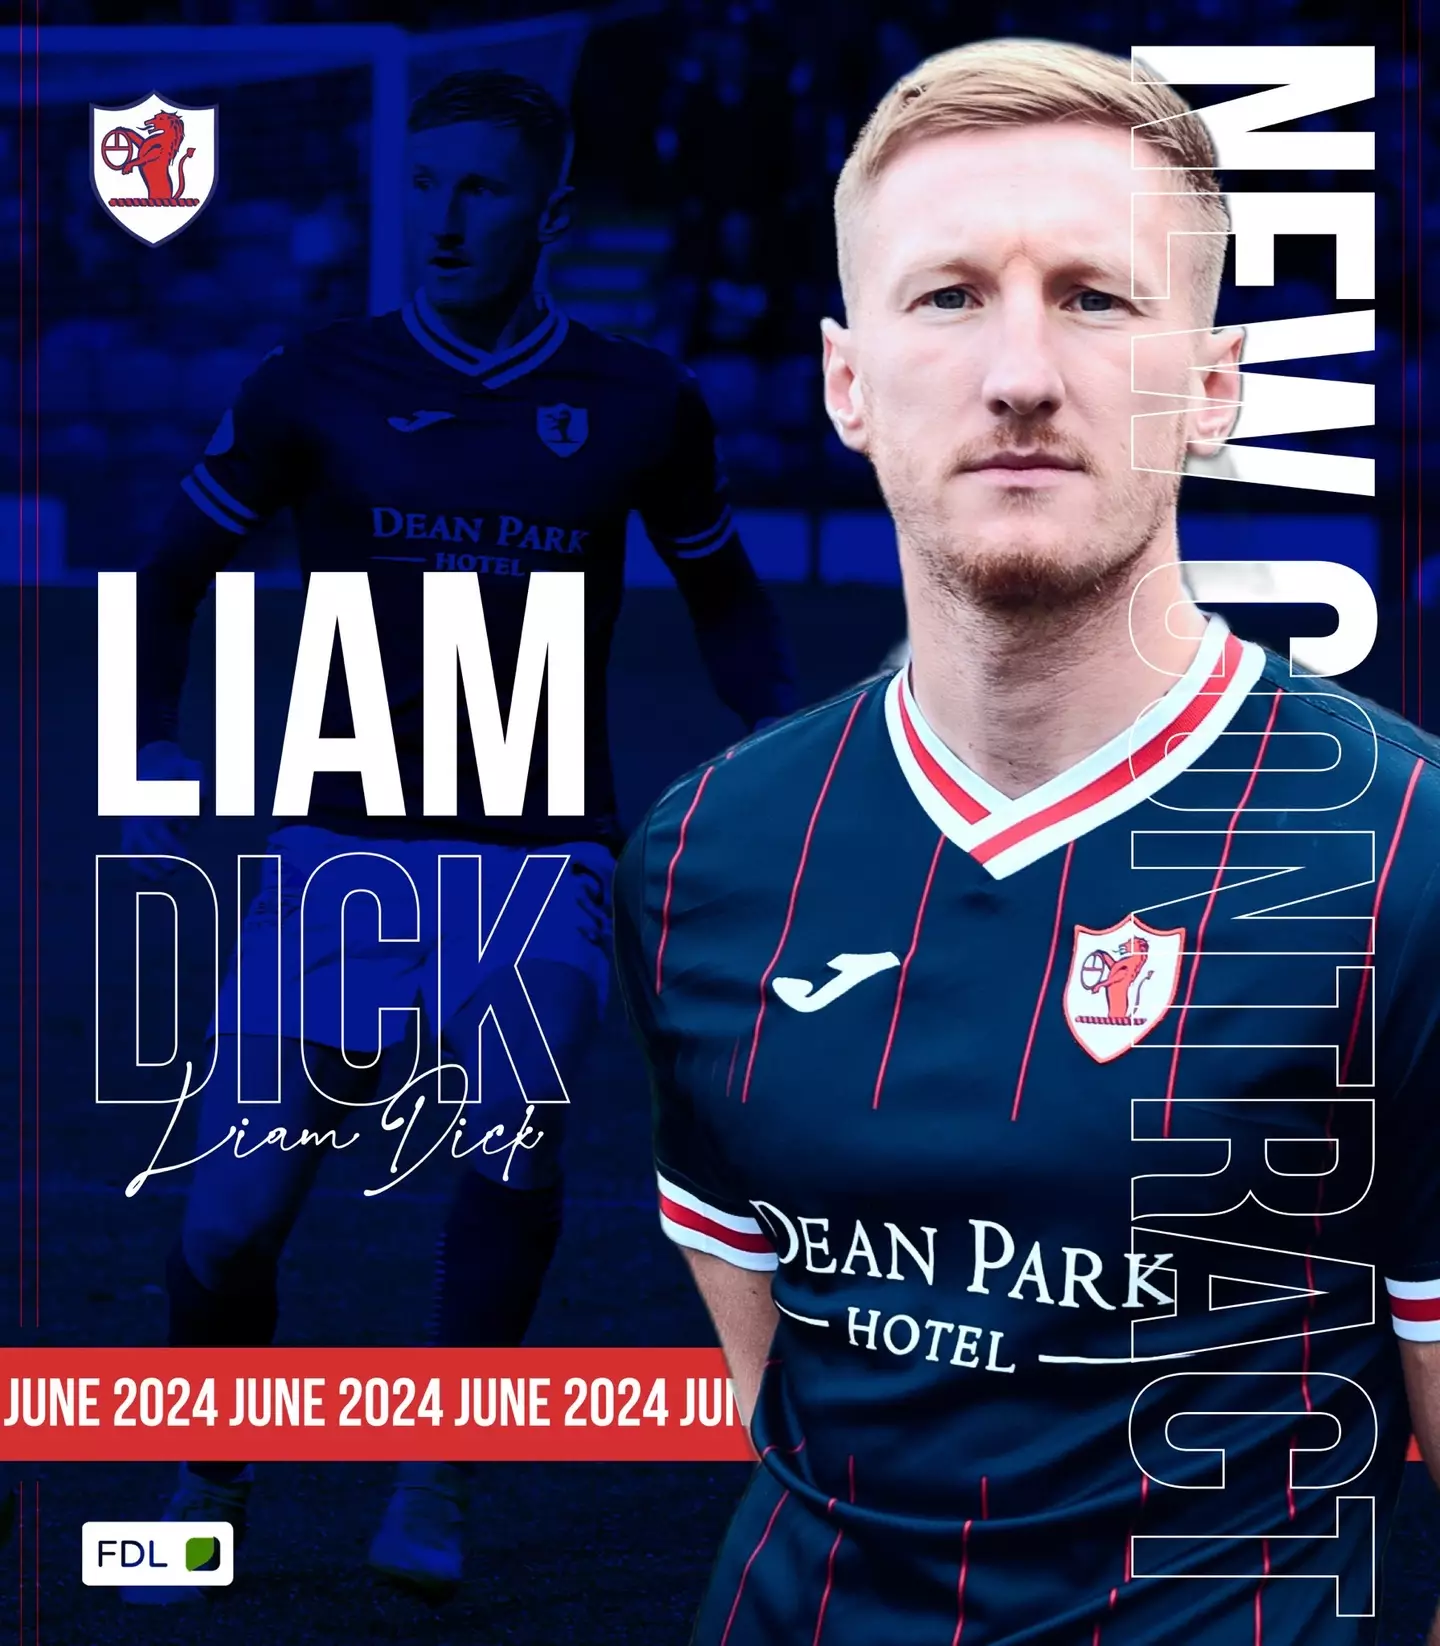 Raith Rovers FC announced Liam Dick's contract extension.